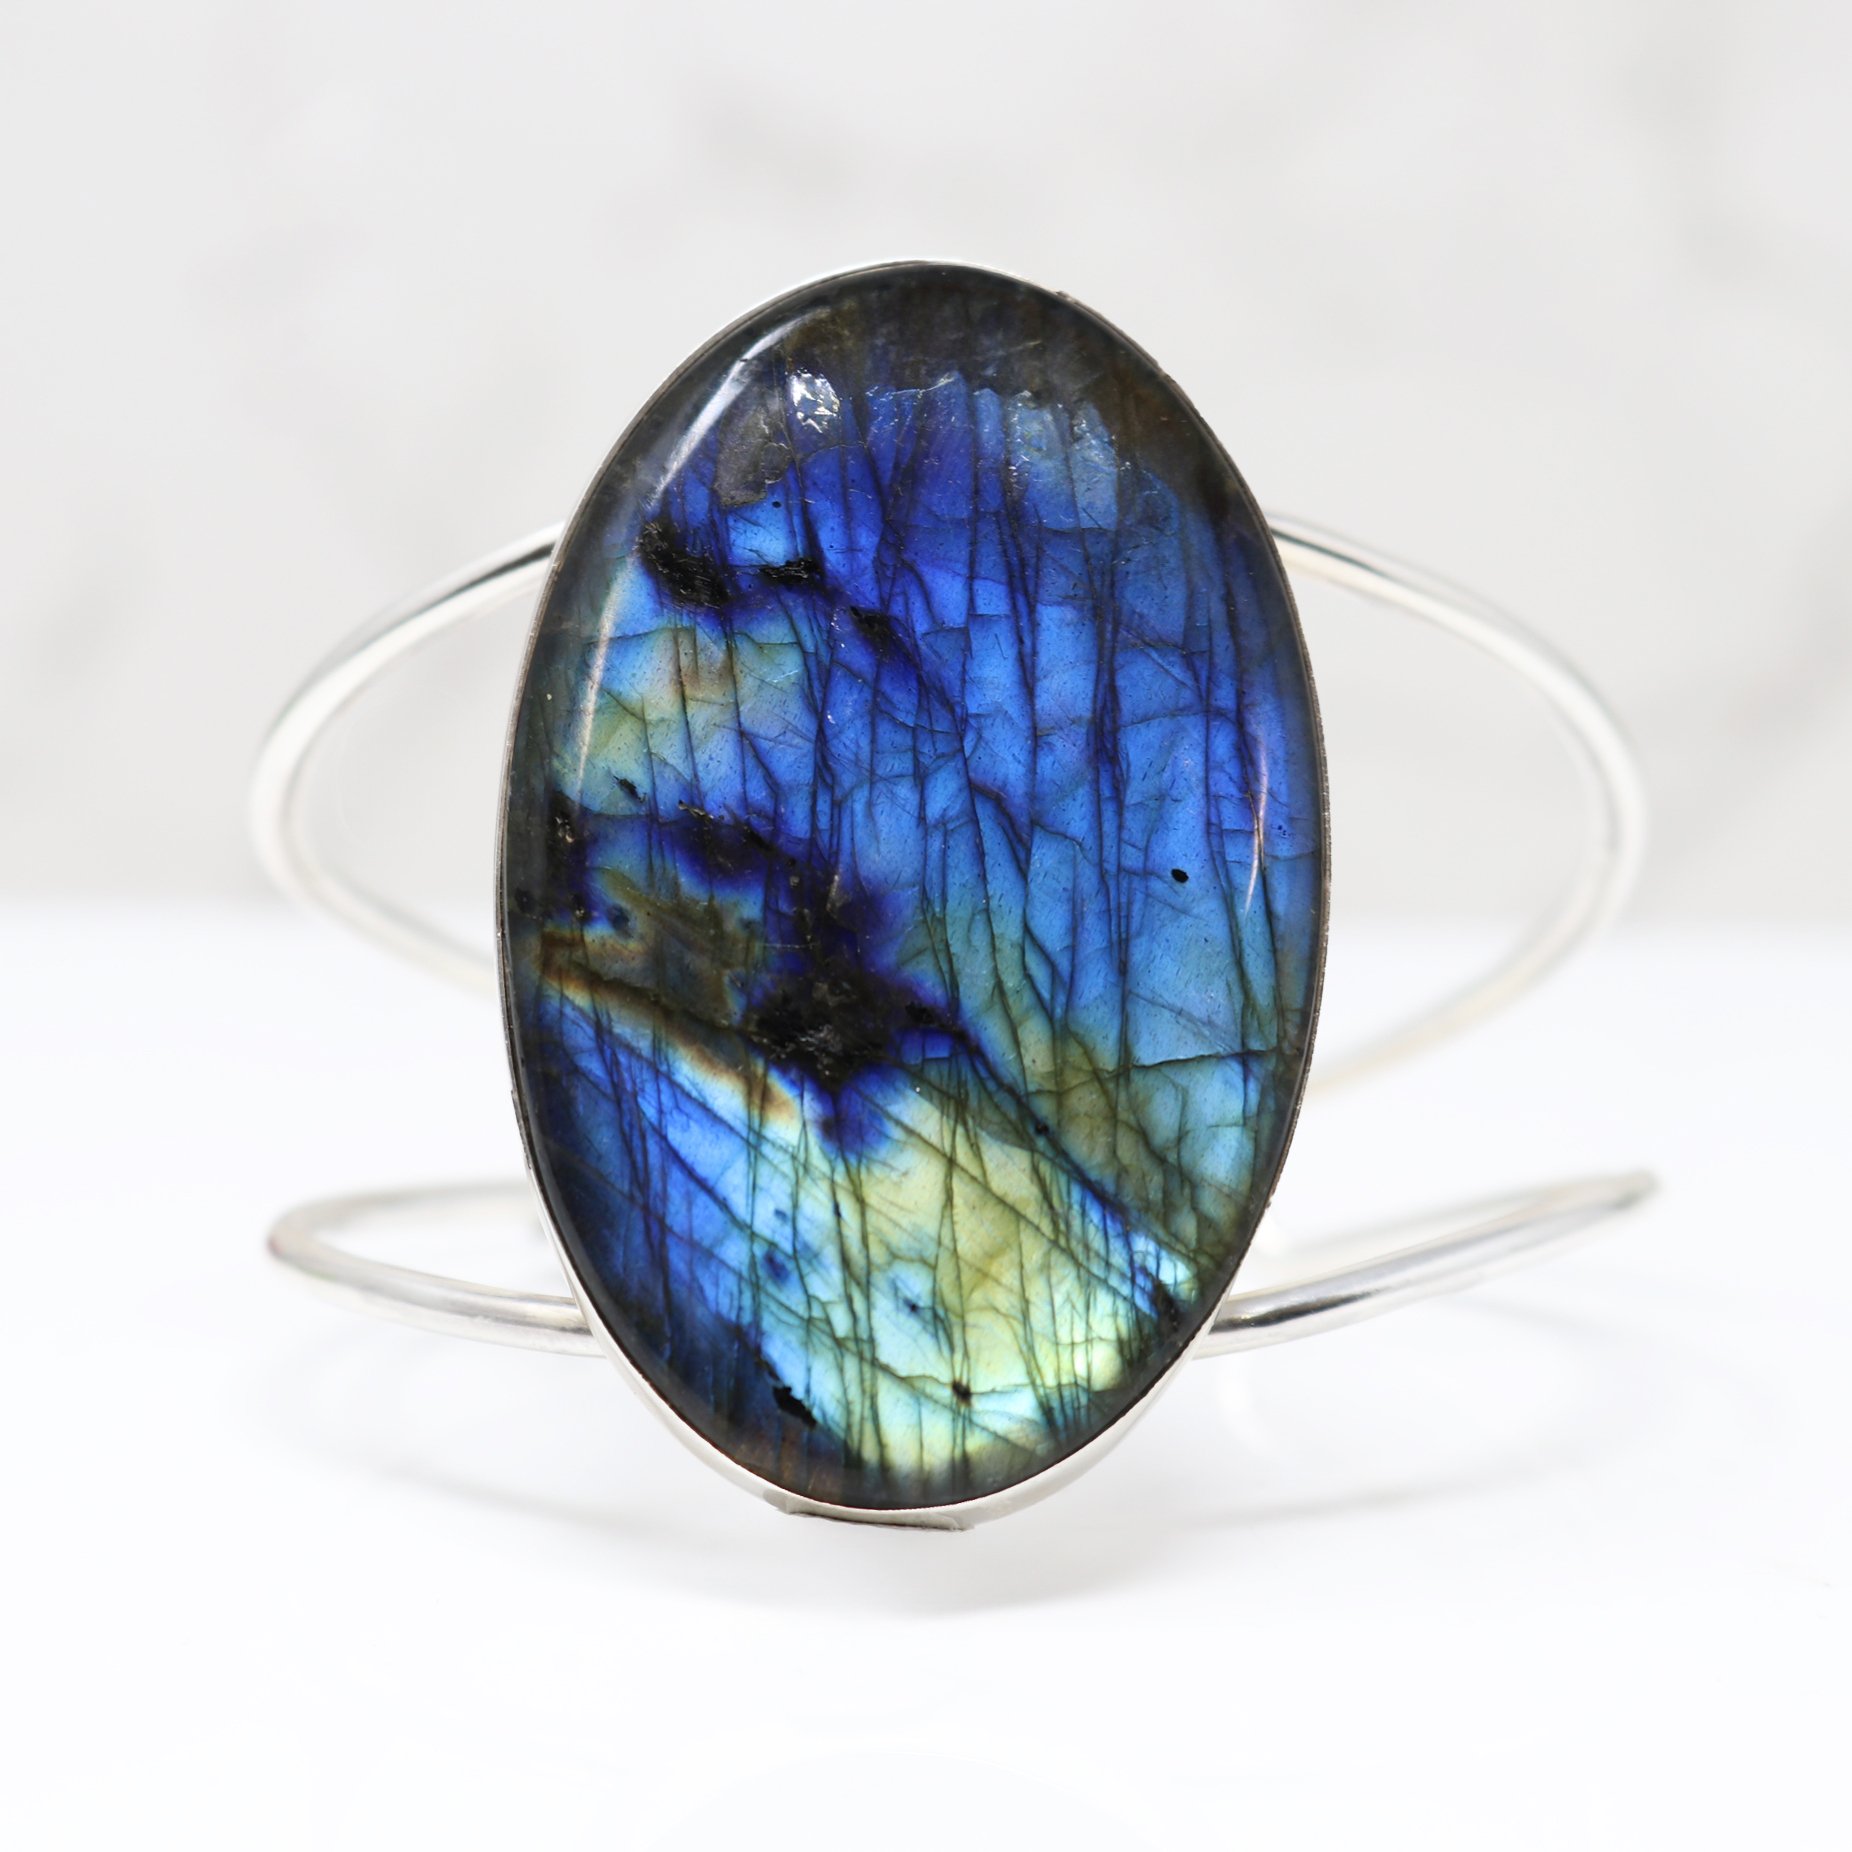 Labradorite Cuff - Large Oval Cabochon With Simple Silver Bezel On Open Double Band